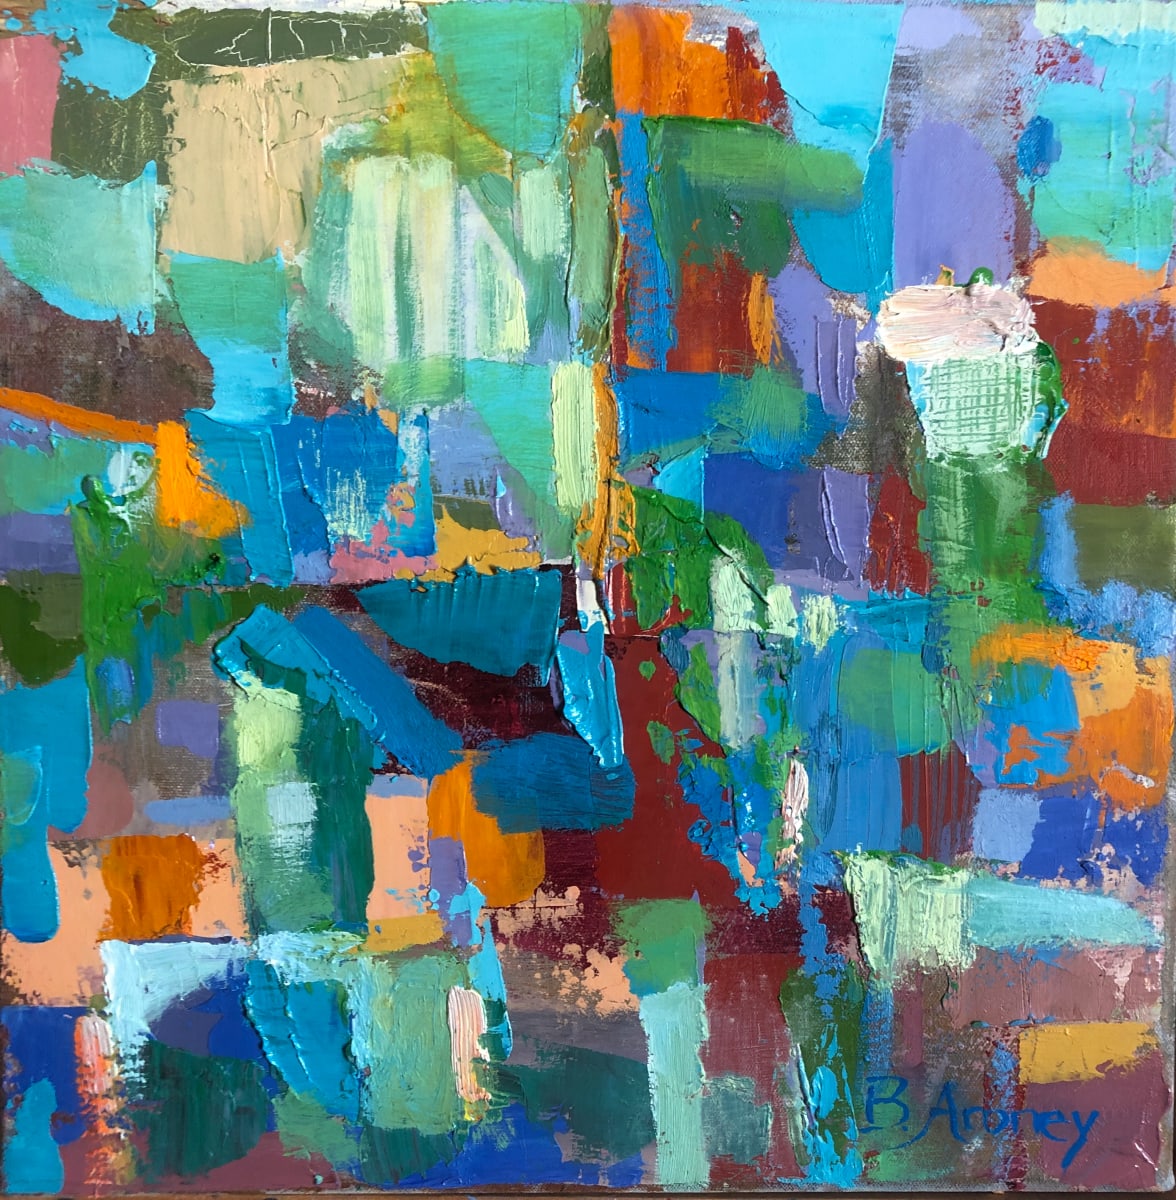 Green by Barbara Aroney  Image: Green, Oil on canvas, 30x30cm